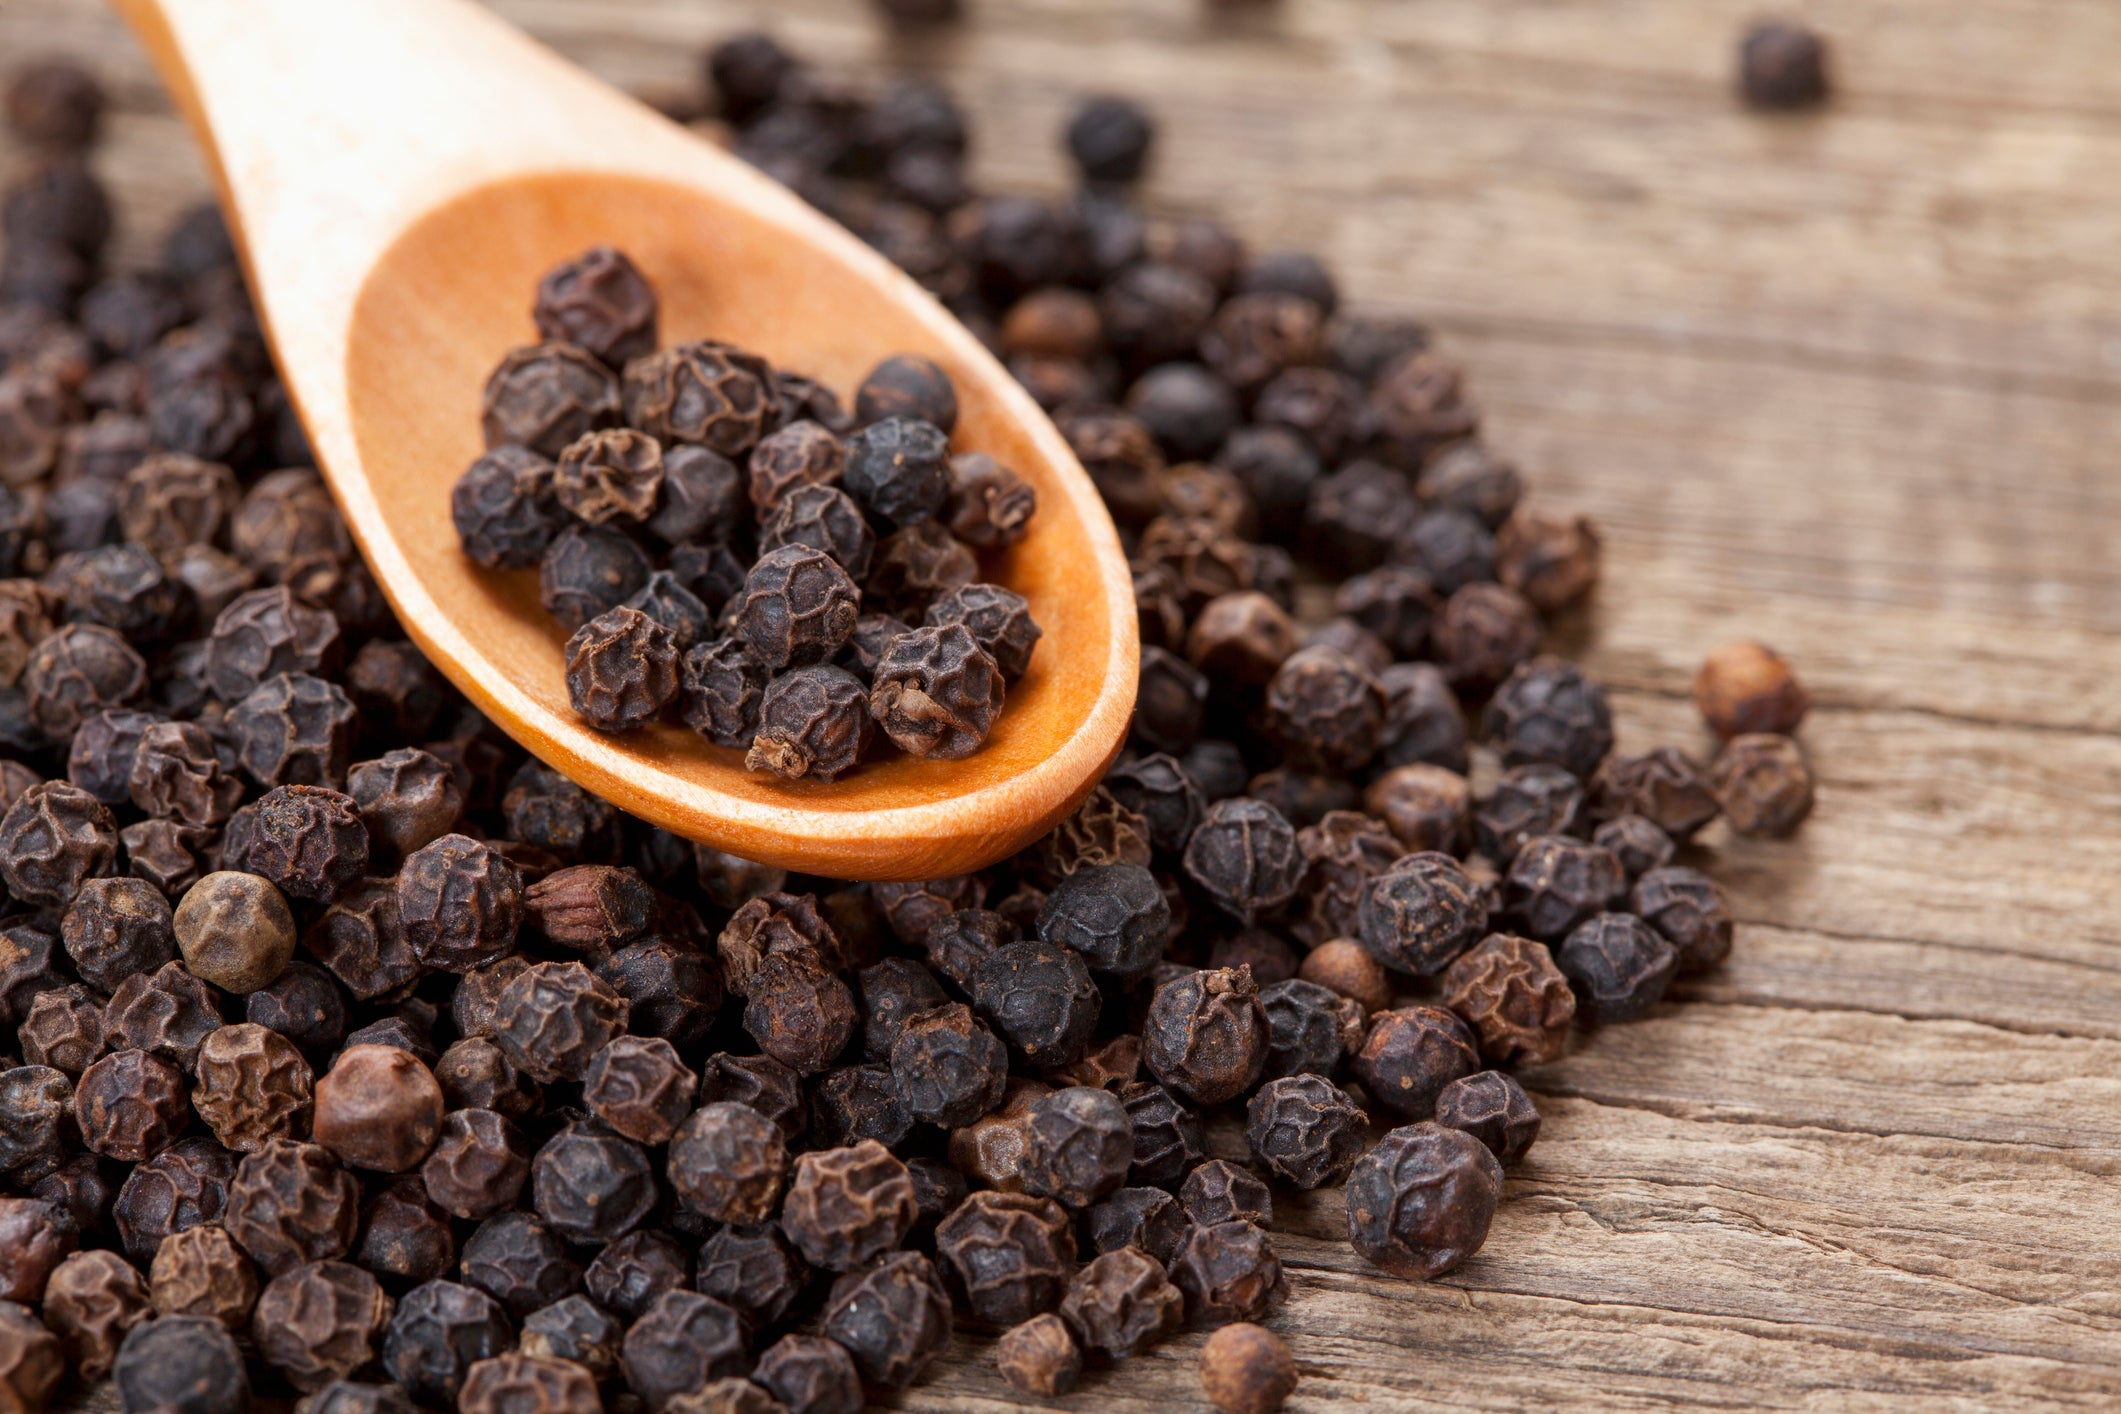 Could black pepper be bad for you? | The Independent